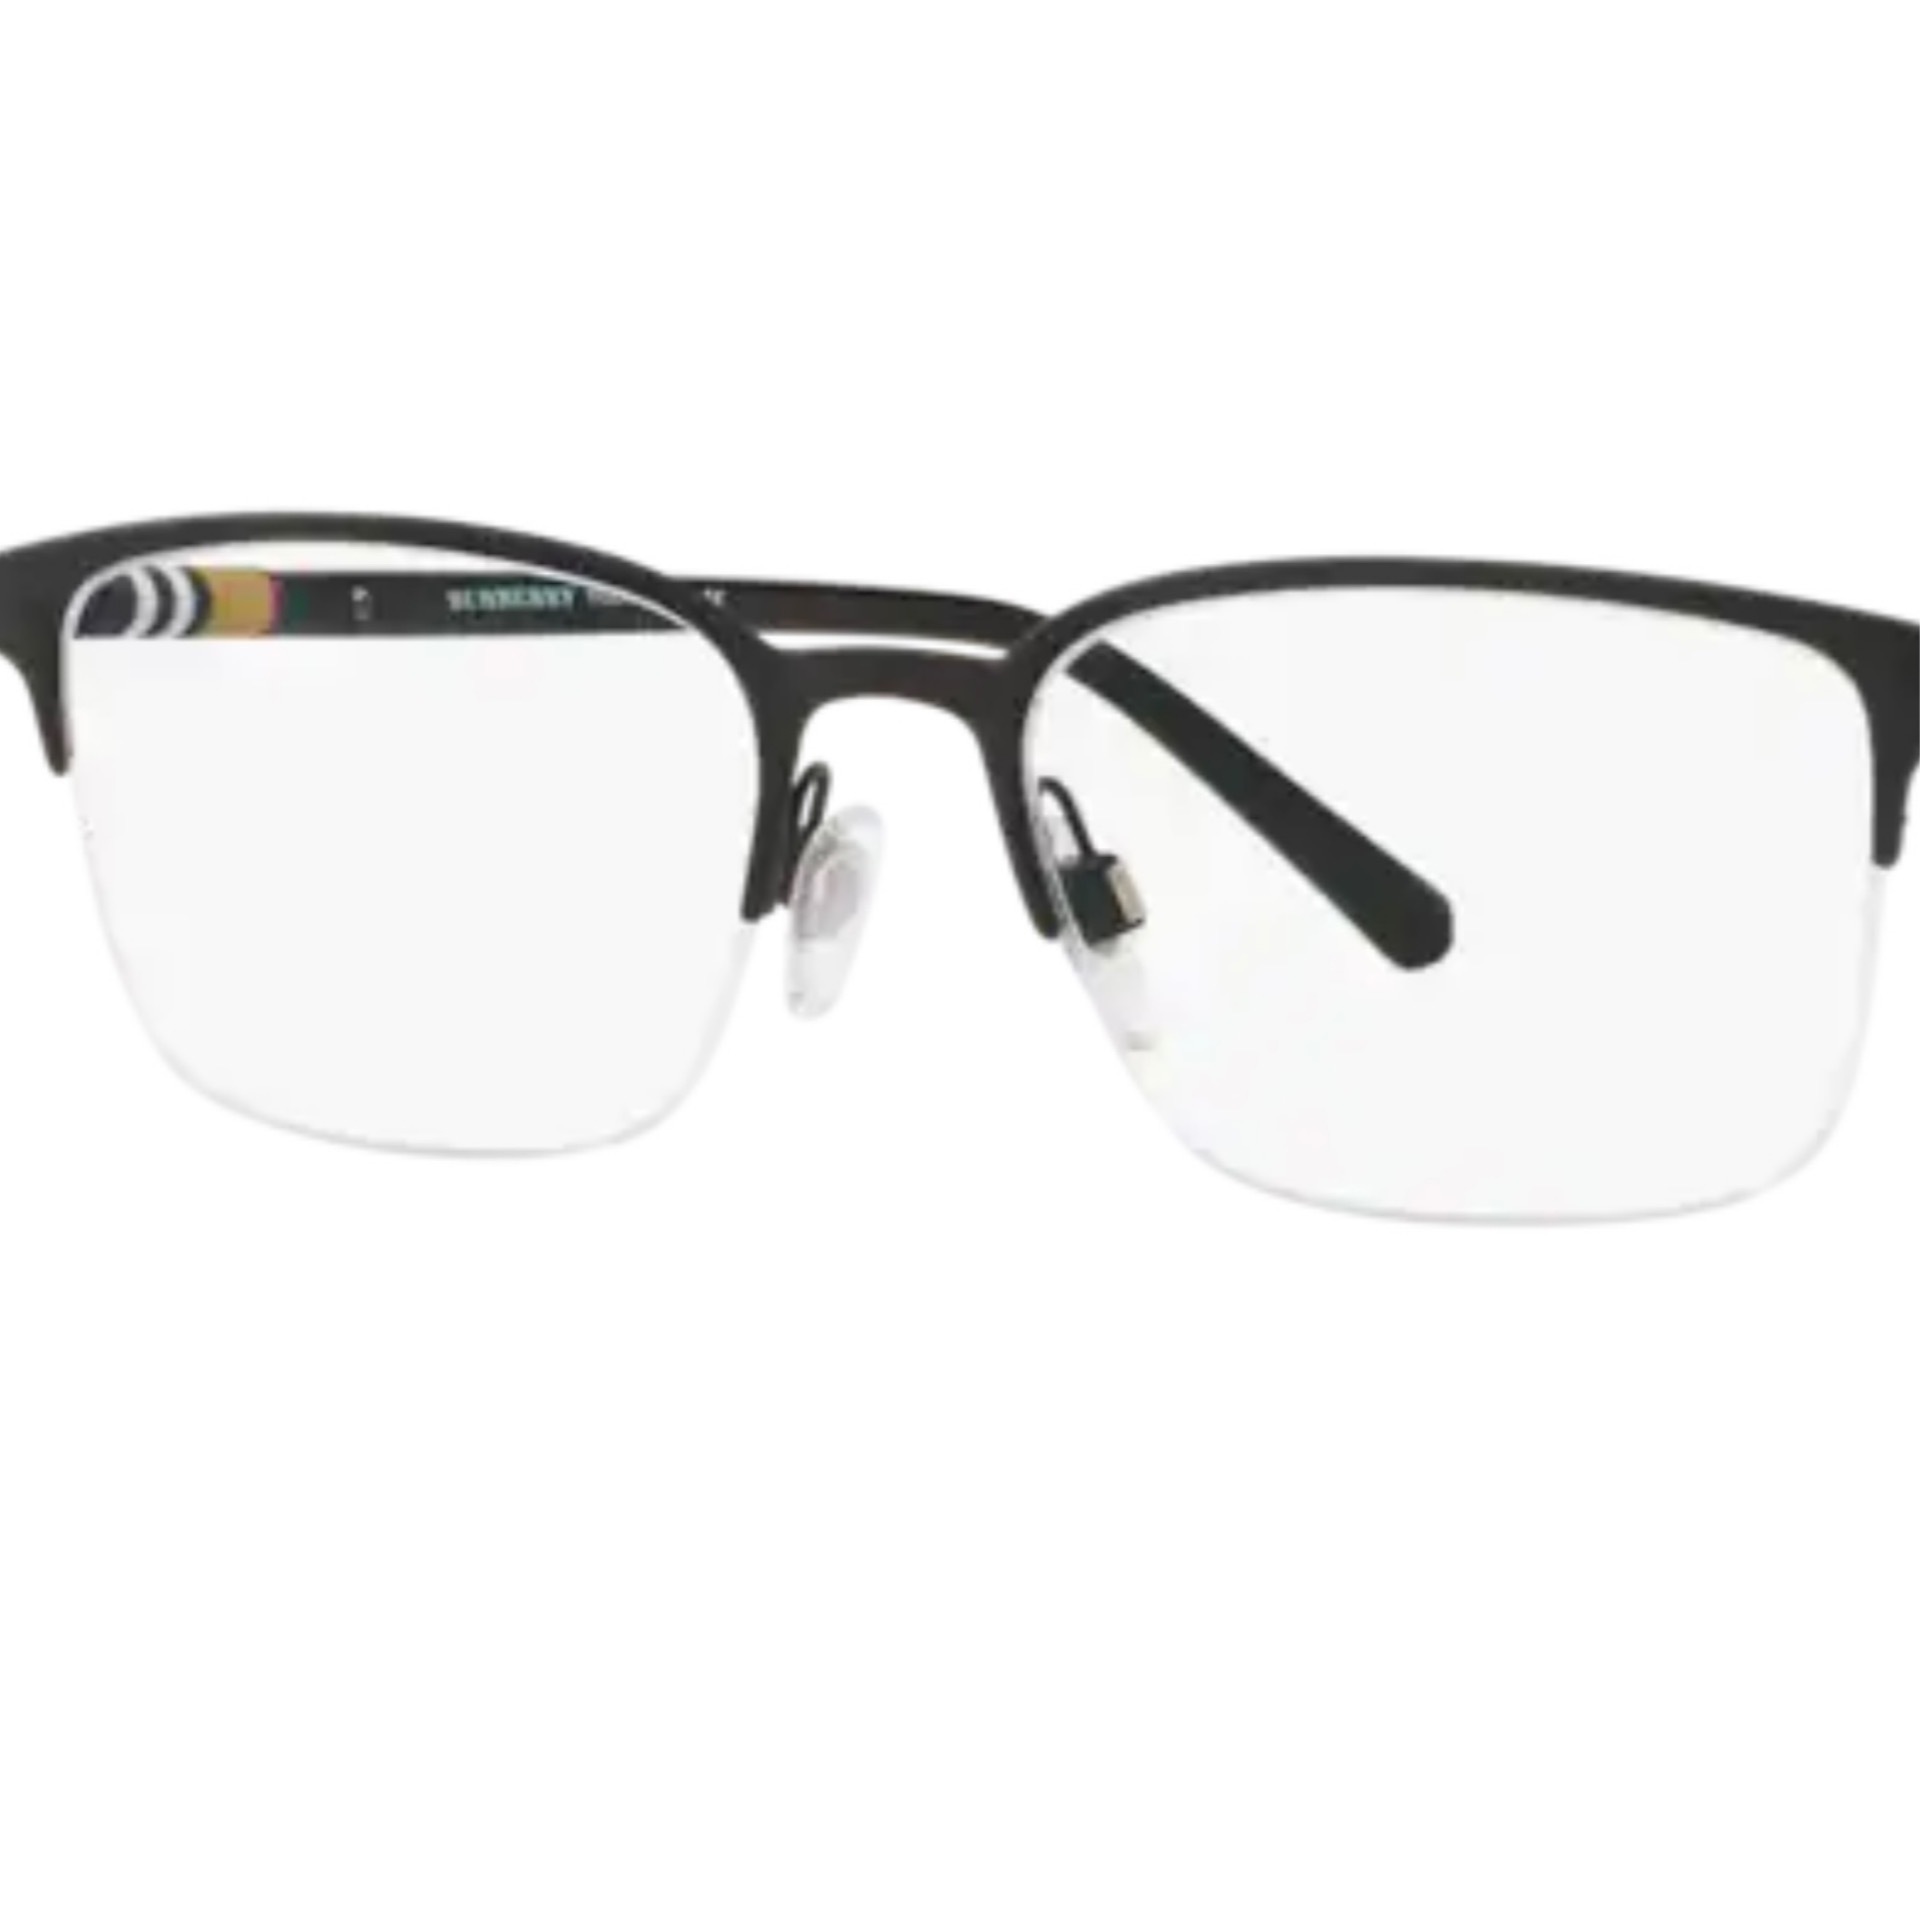 Burberry 54mm Semi Rimless Optical Glasses in Black Rubber 1323-1213-54 |  MIC OPTICAL北美网上配镜